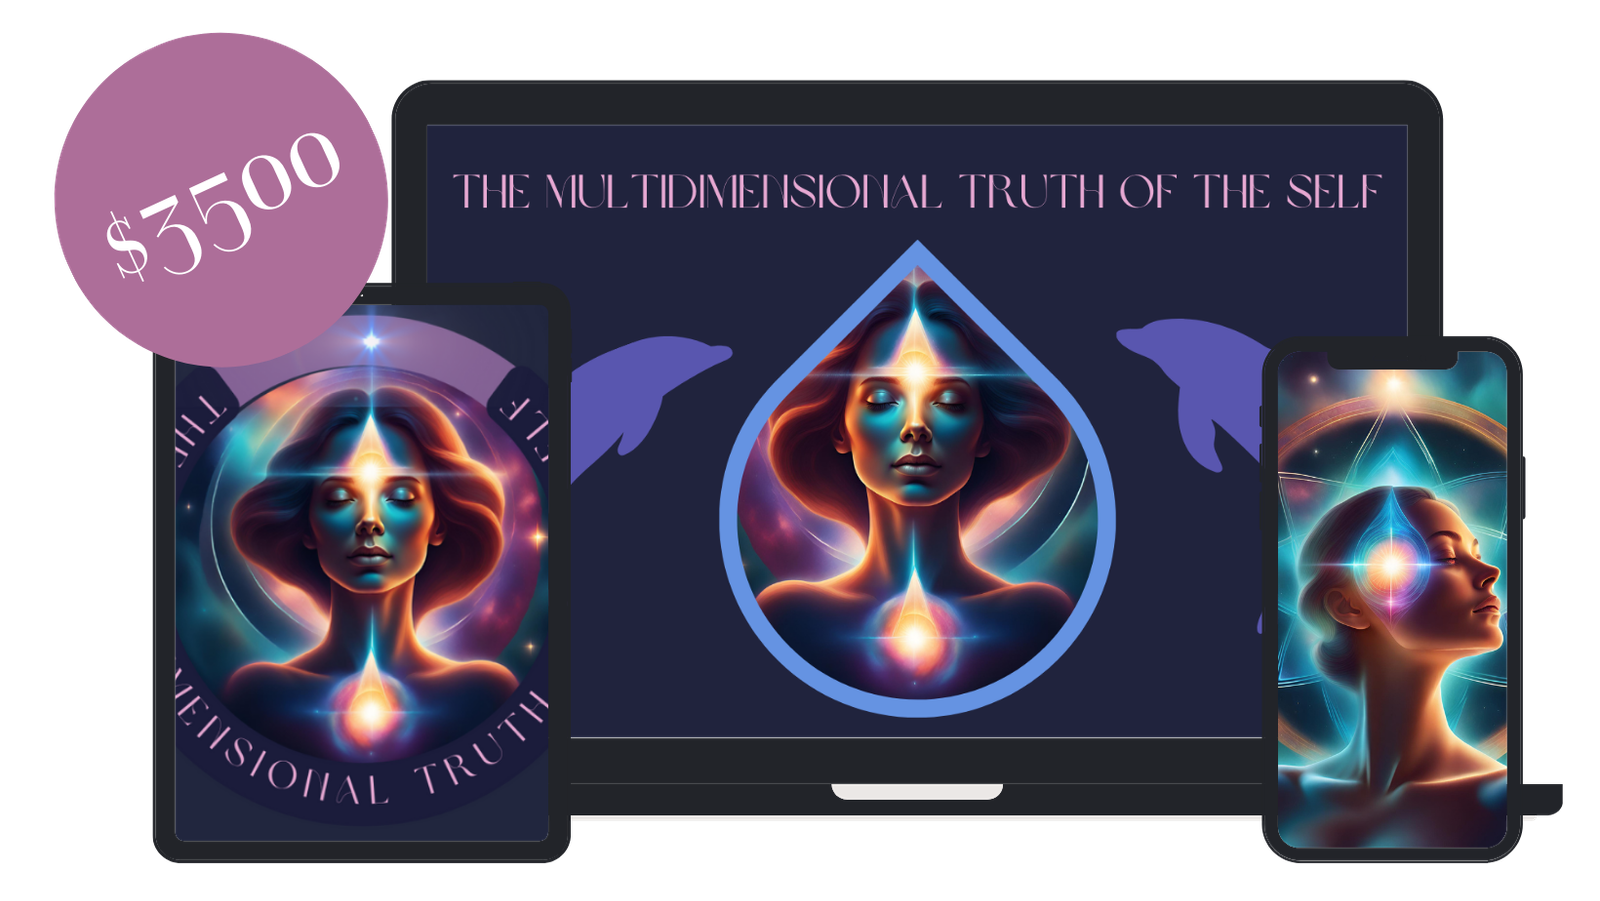 The Multidimensional Truth of the Self